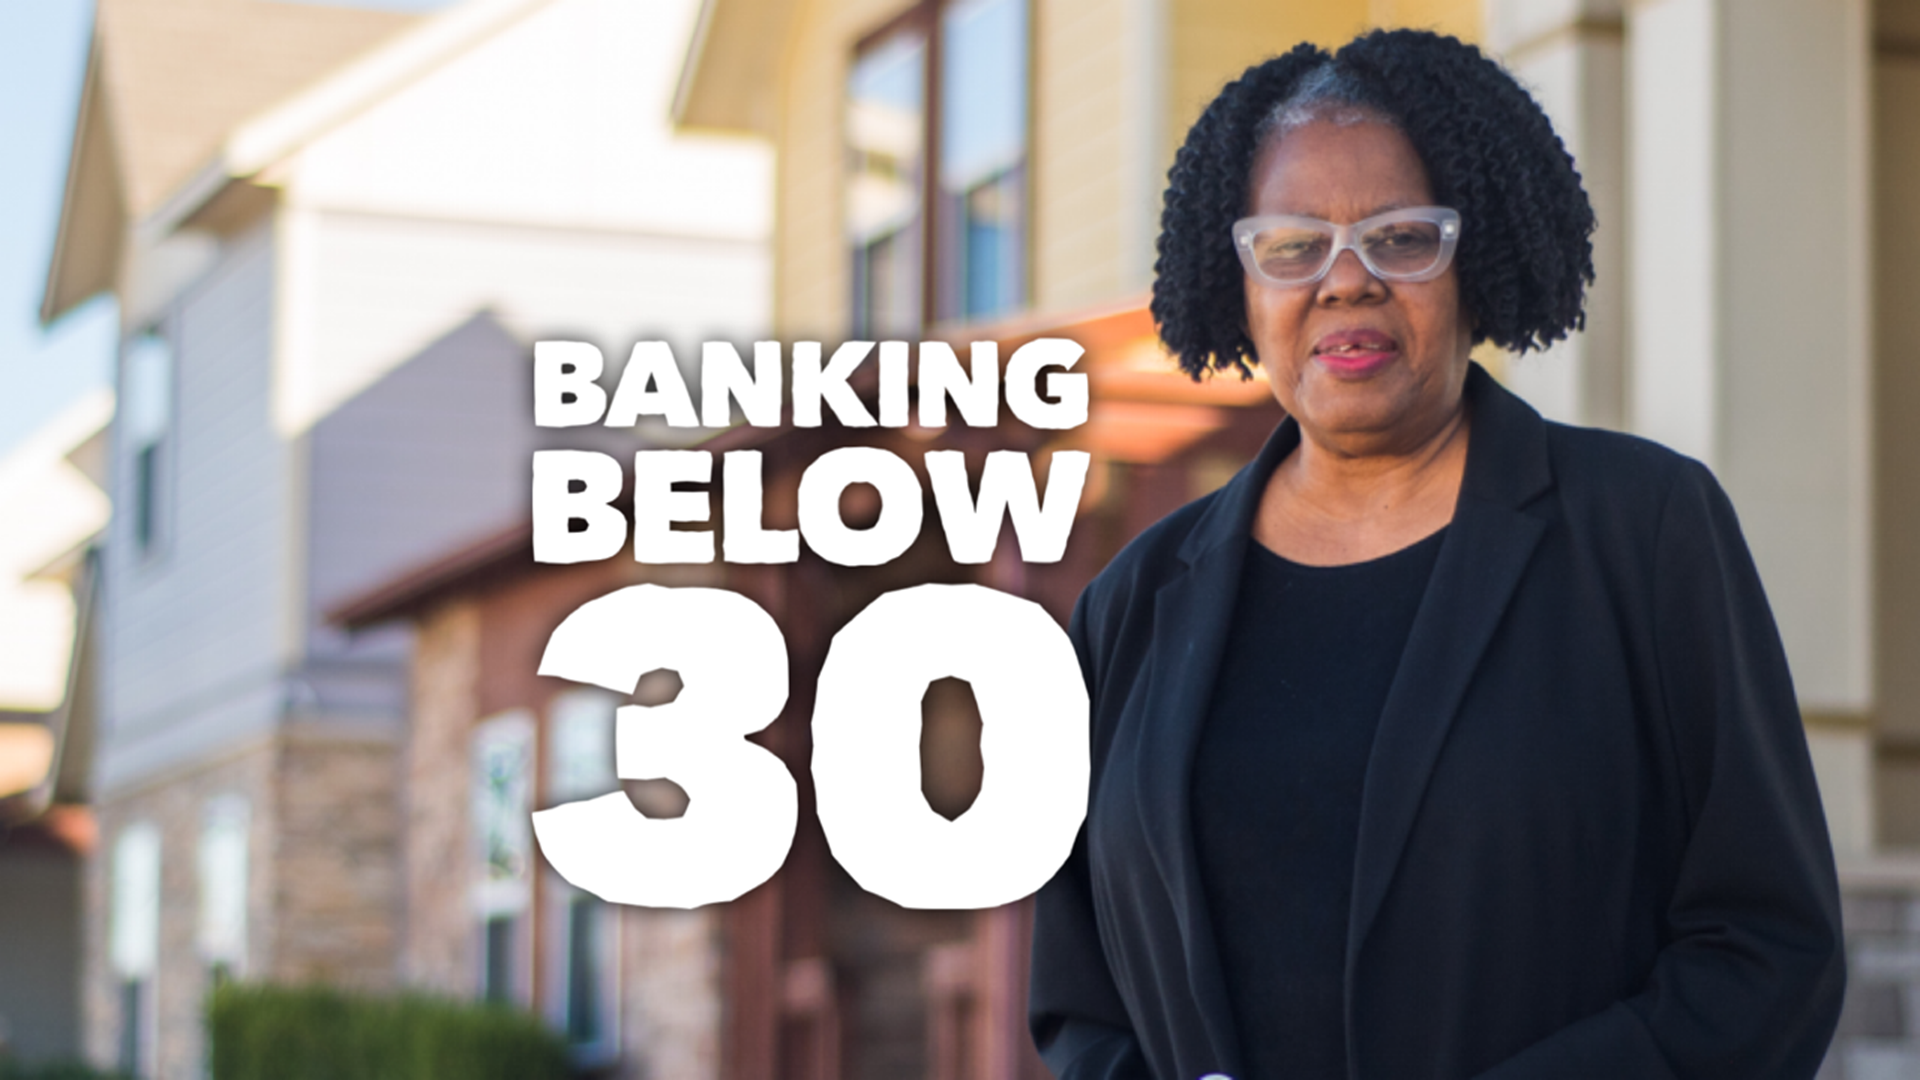 A WFAA investigation found bank examiners allow banks to exclude service to minority communities, leading to a call for federal investigators to step in.